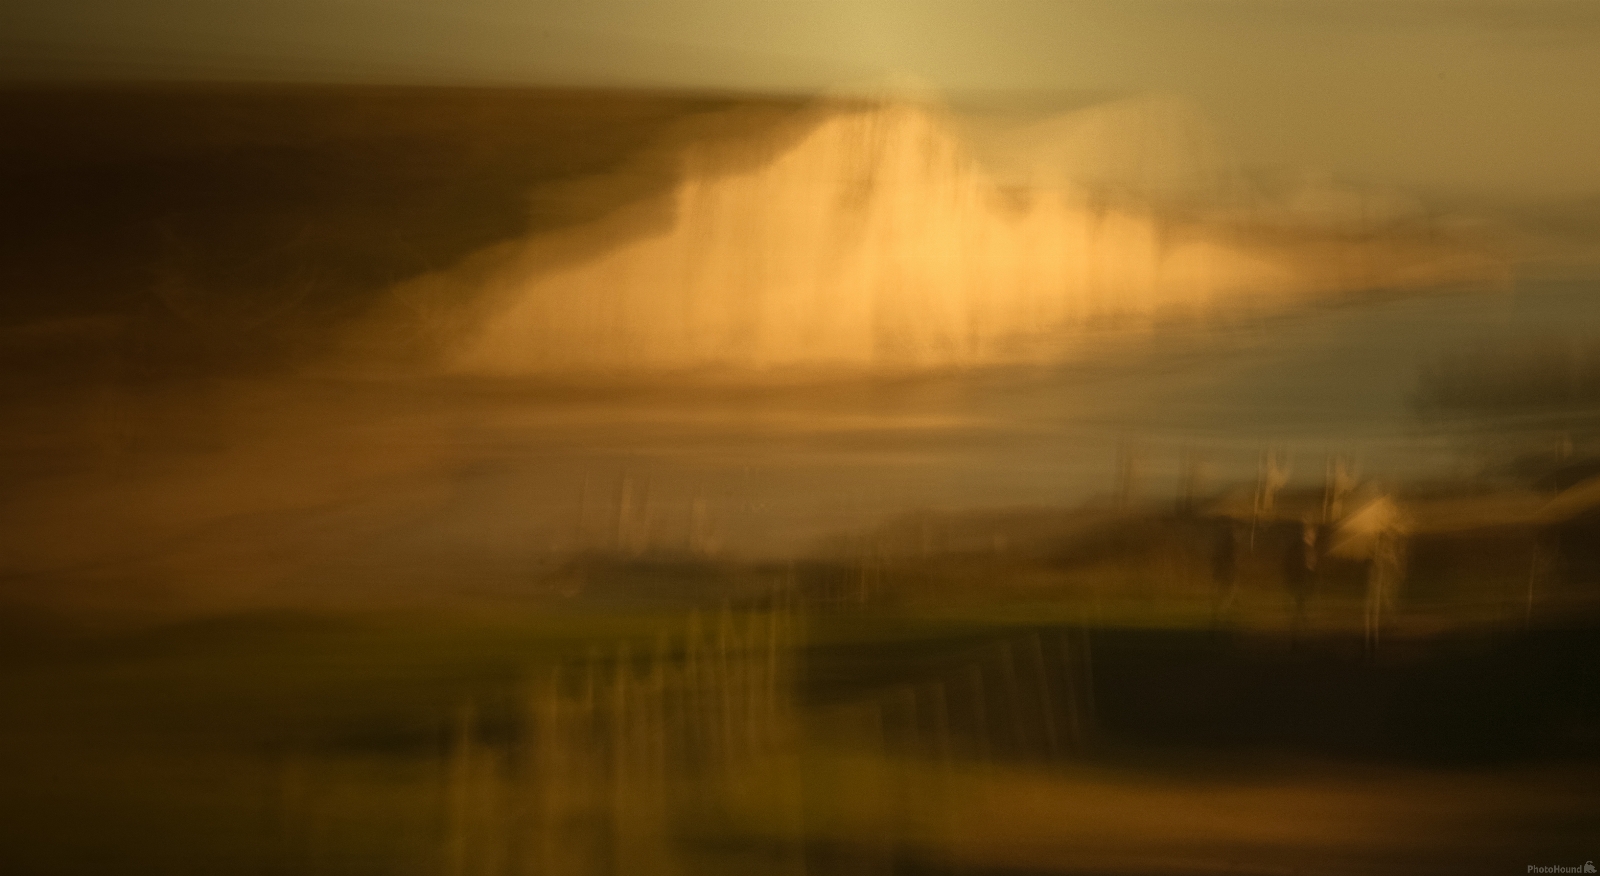 Image of Coastguard Cottages & Seven Sisters by Martin Heaps